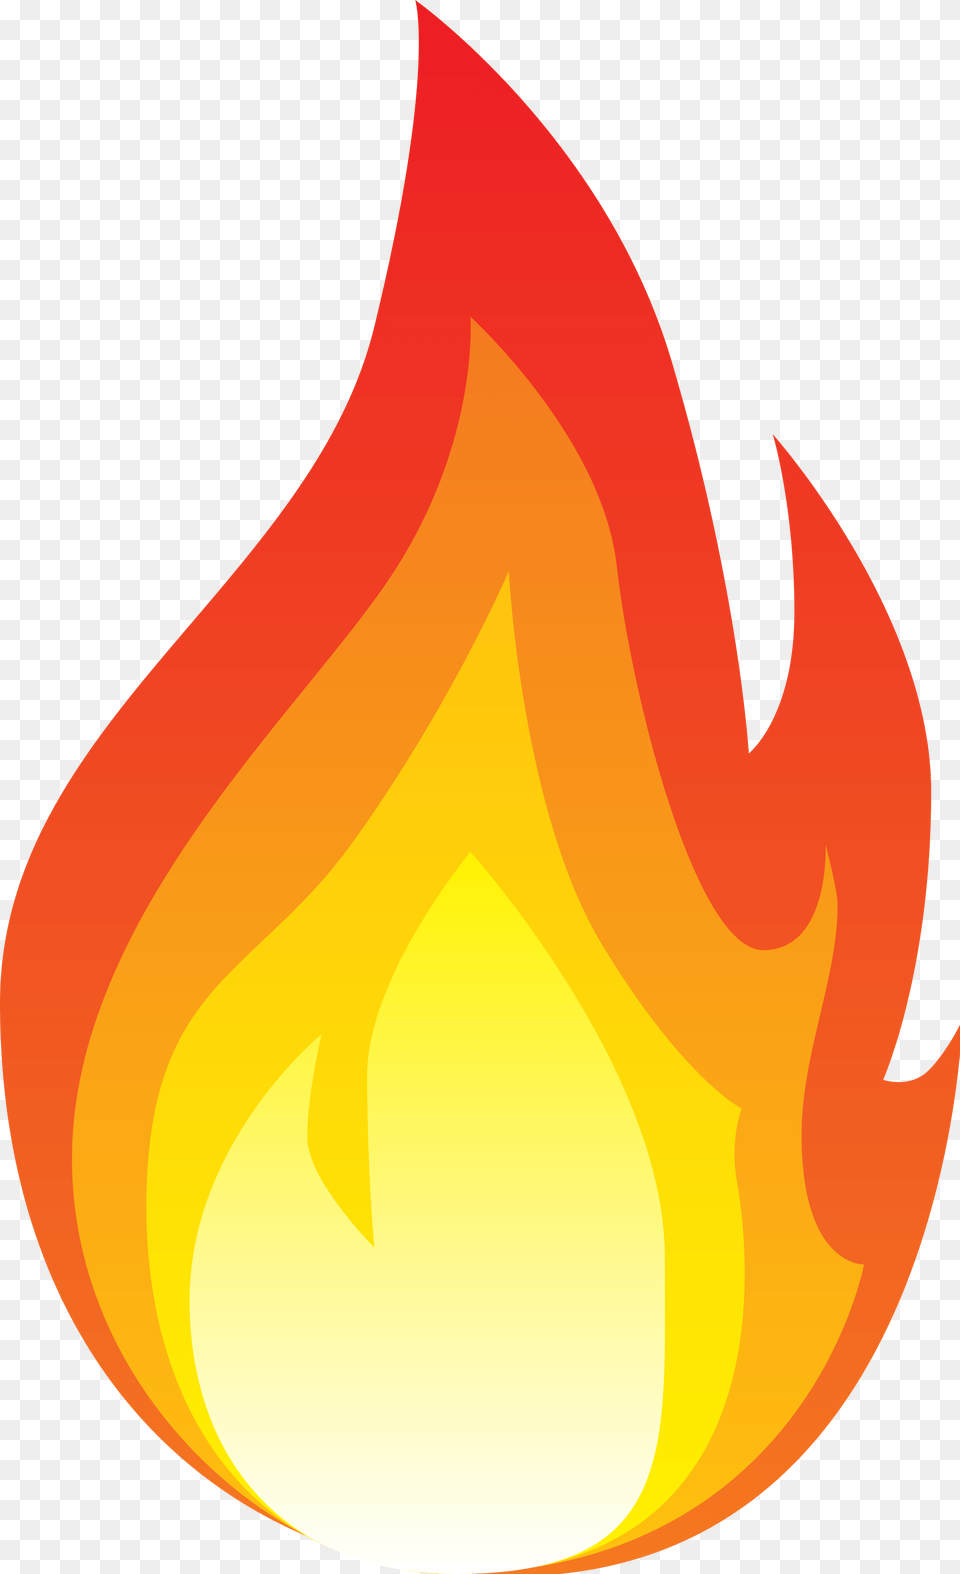 Transparent Flame Silhouette Transparent Background Flame Icon, Fire, Astronomy, Moon, Nature Png Image